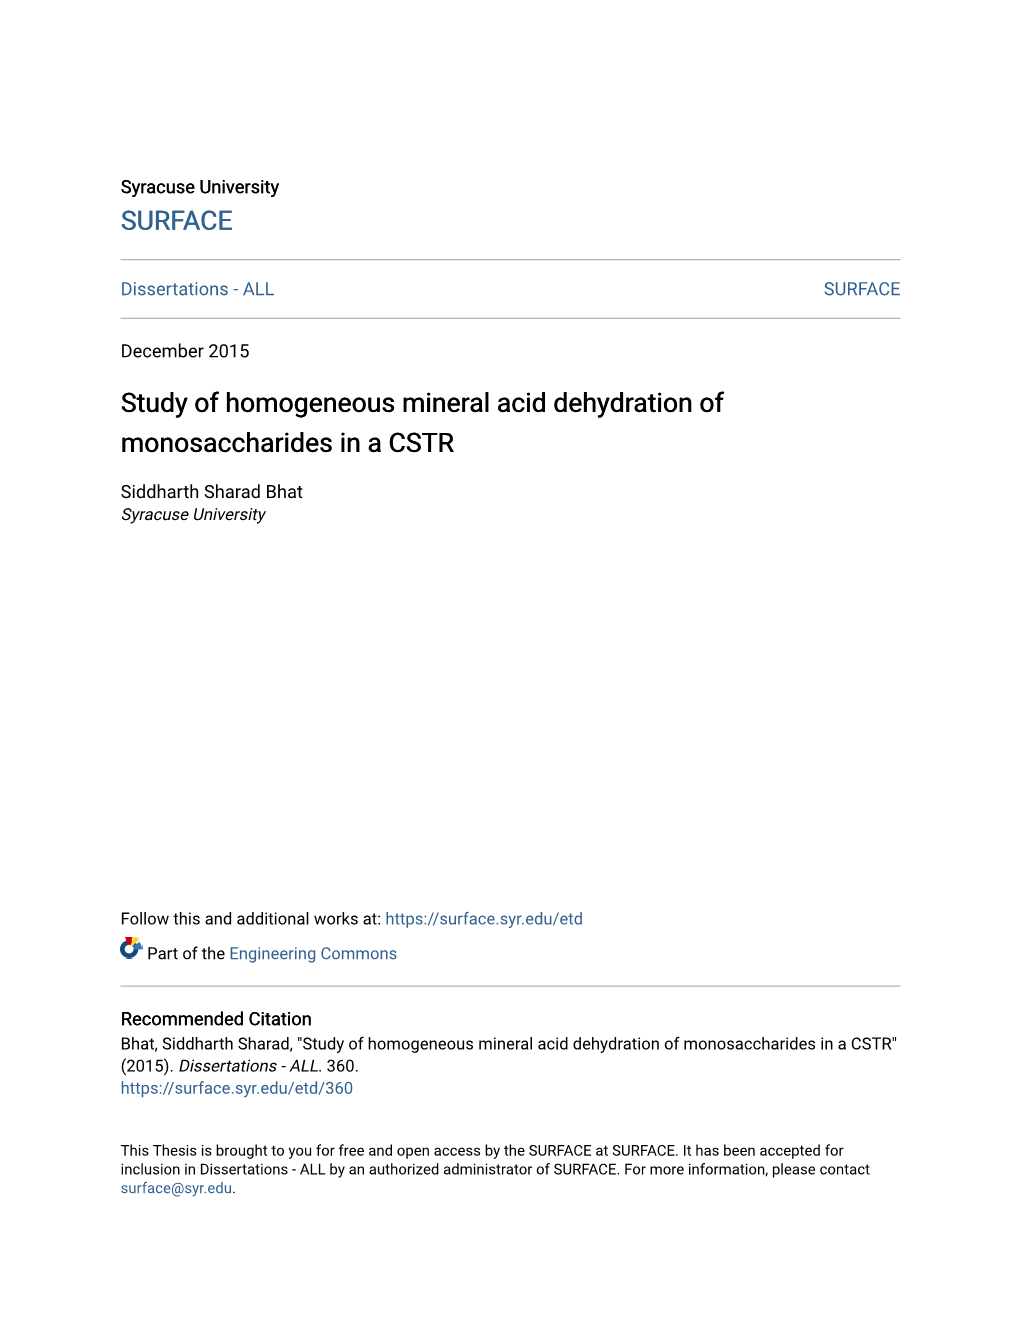 Study of Homogeneous Mineral Acid Dehydration of Monosaccharides in a CSTR